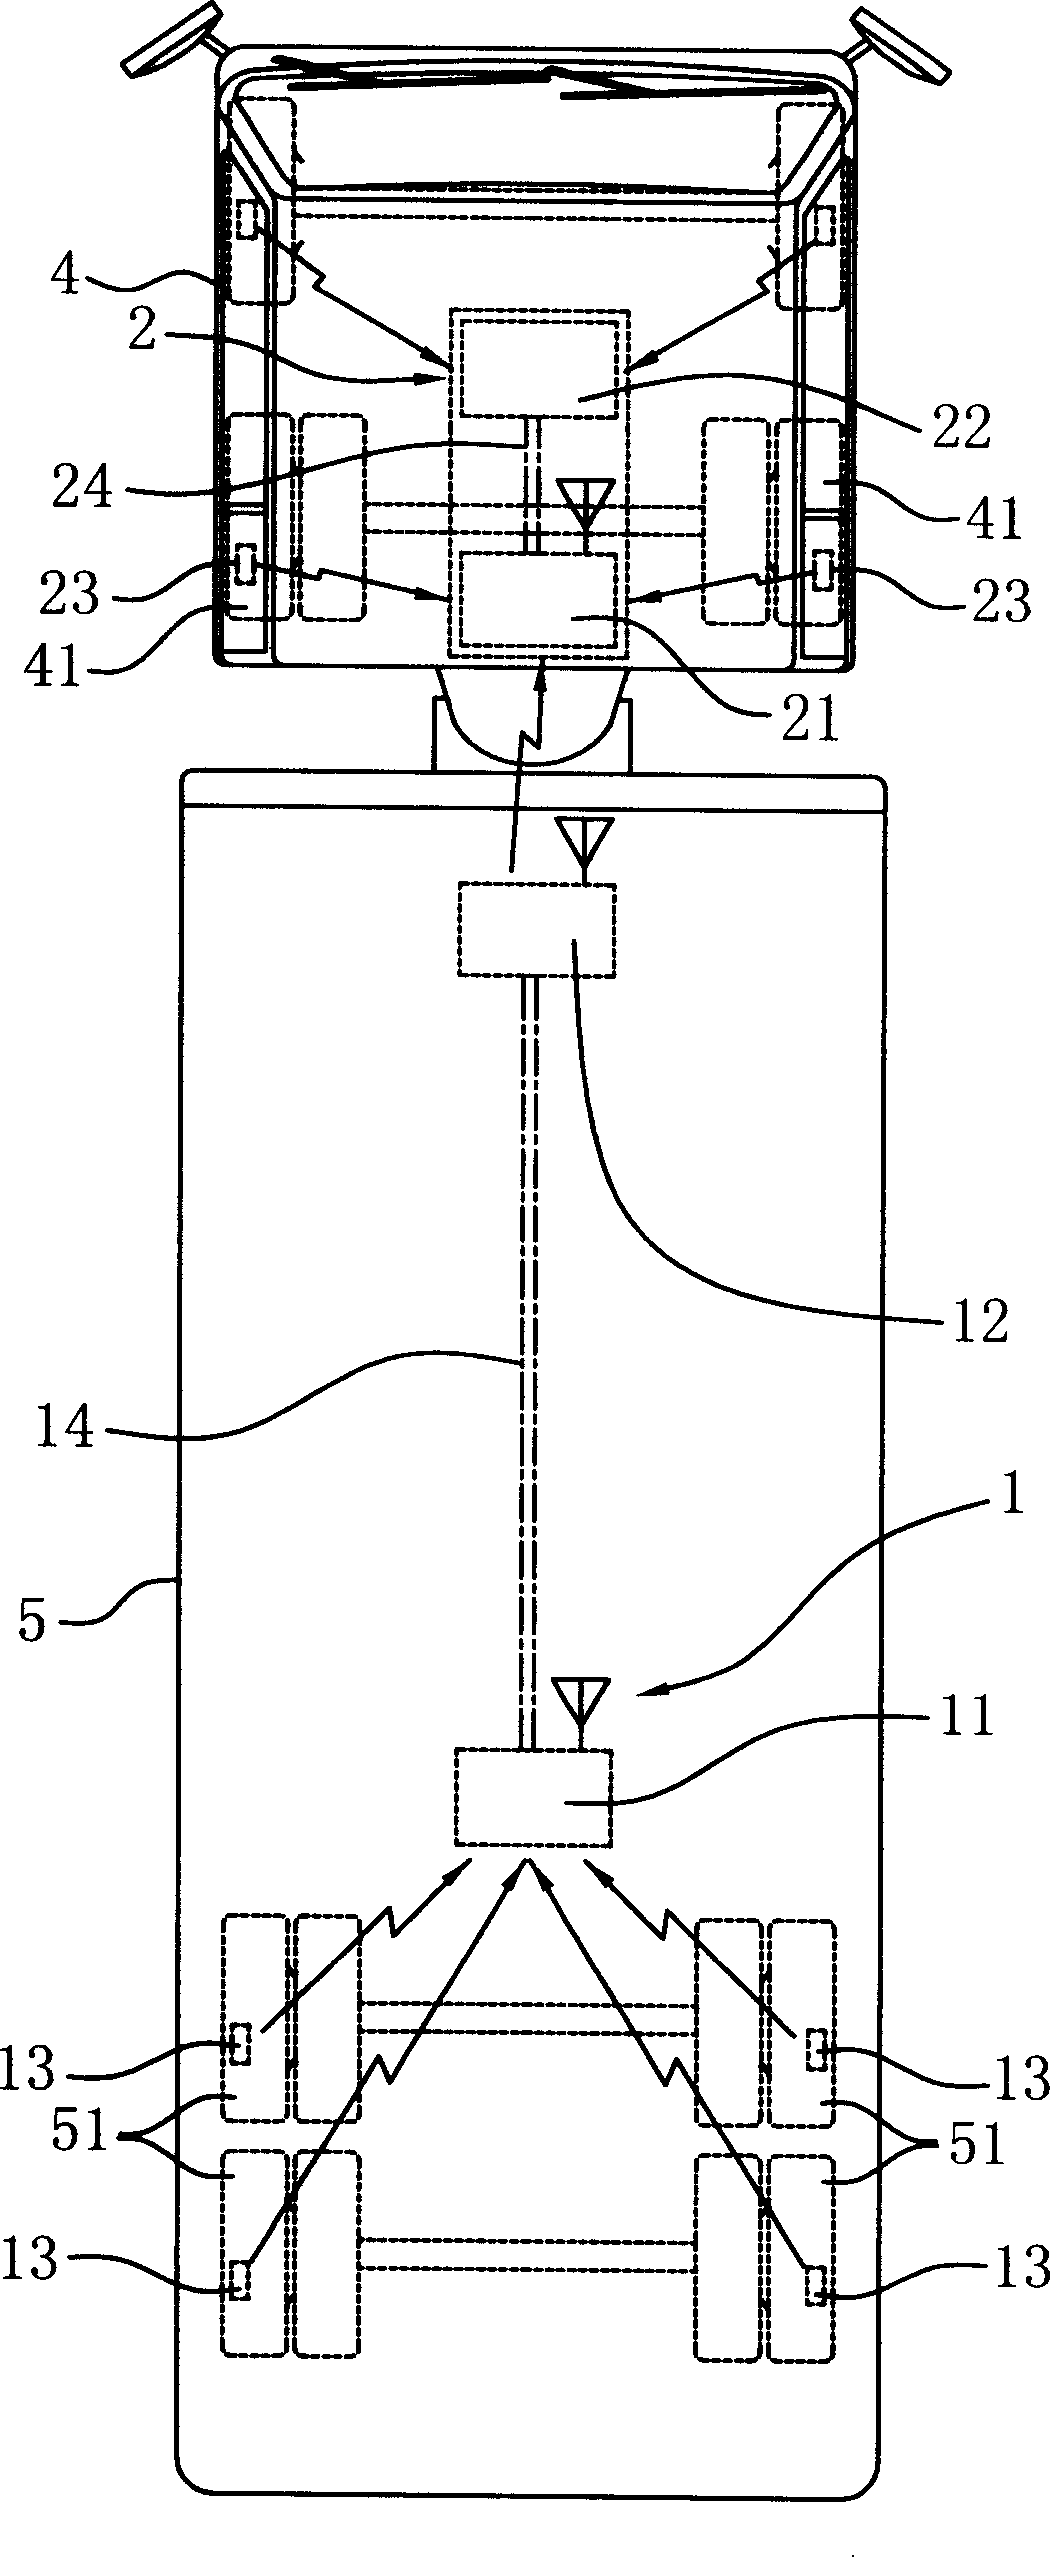 Bidirectional communication linking system of tire pressure detector